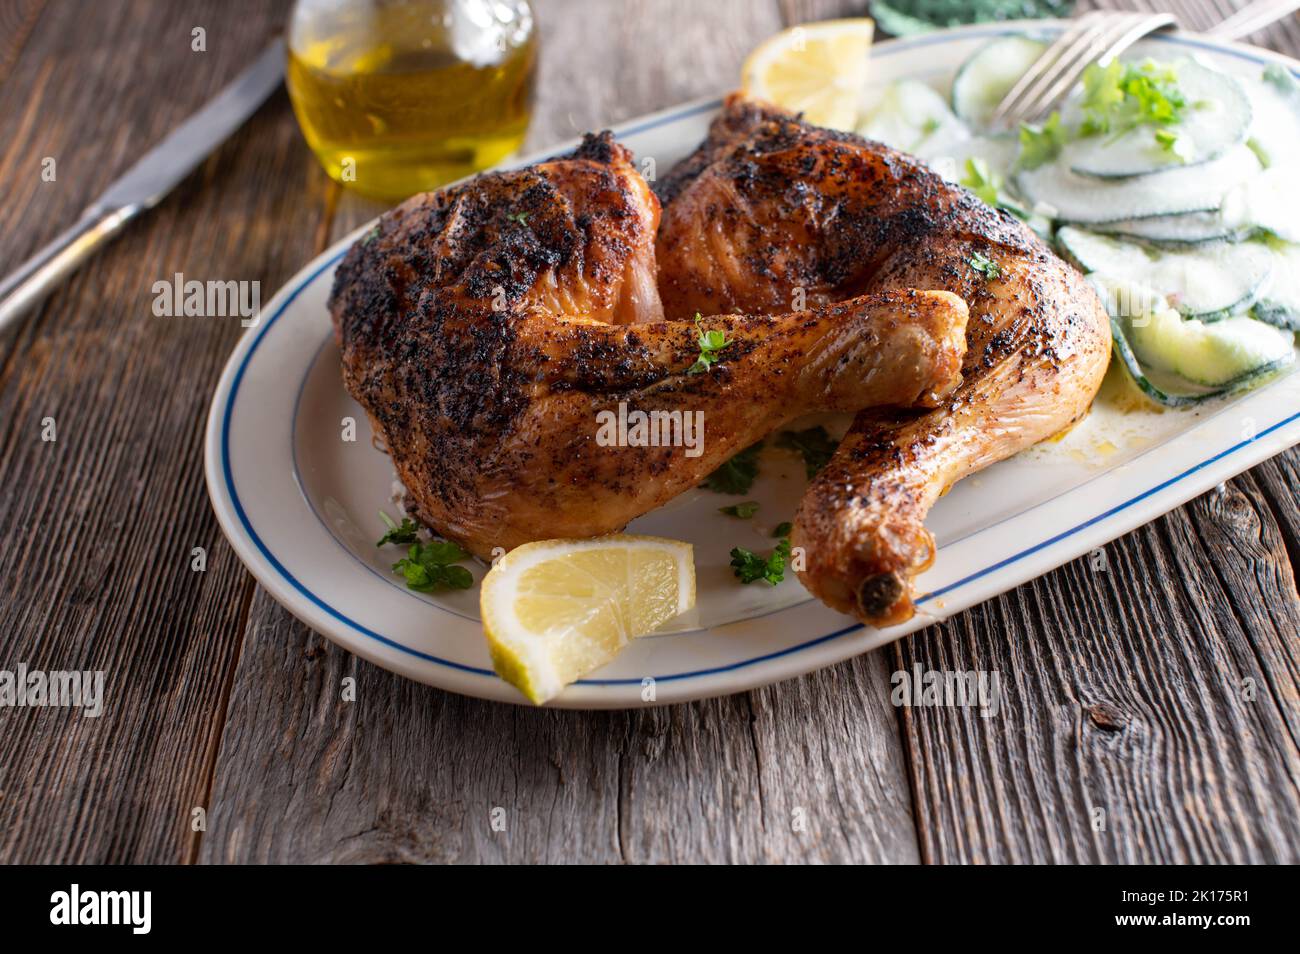 Low carb chicken dish with cucumber salad on plate Stock Photo